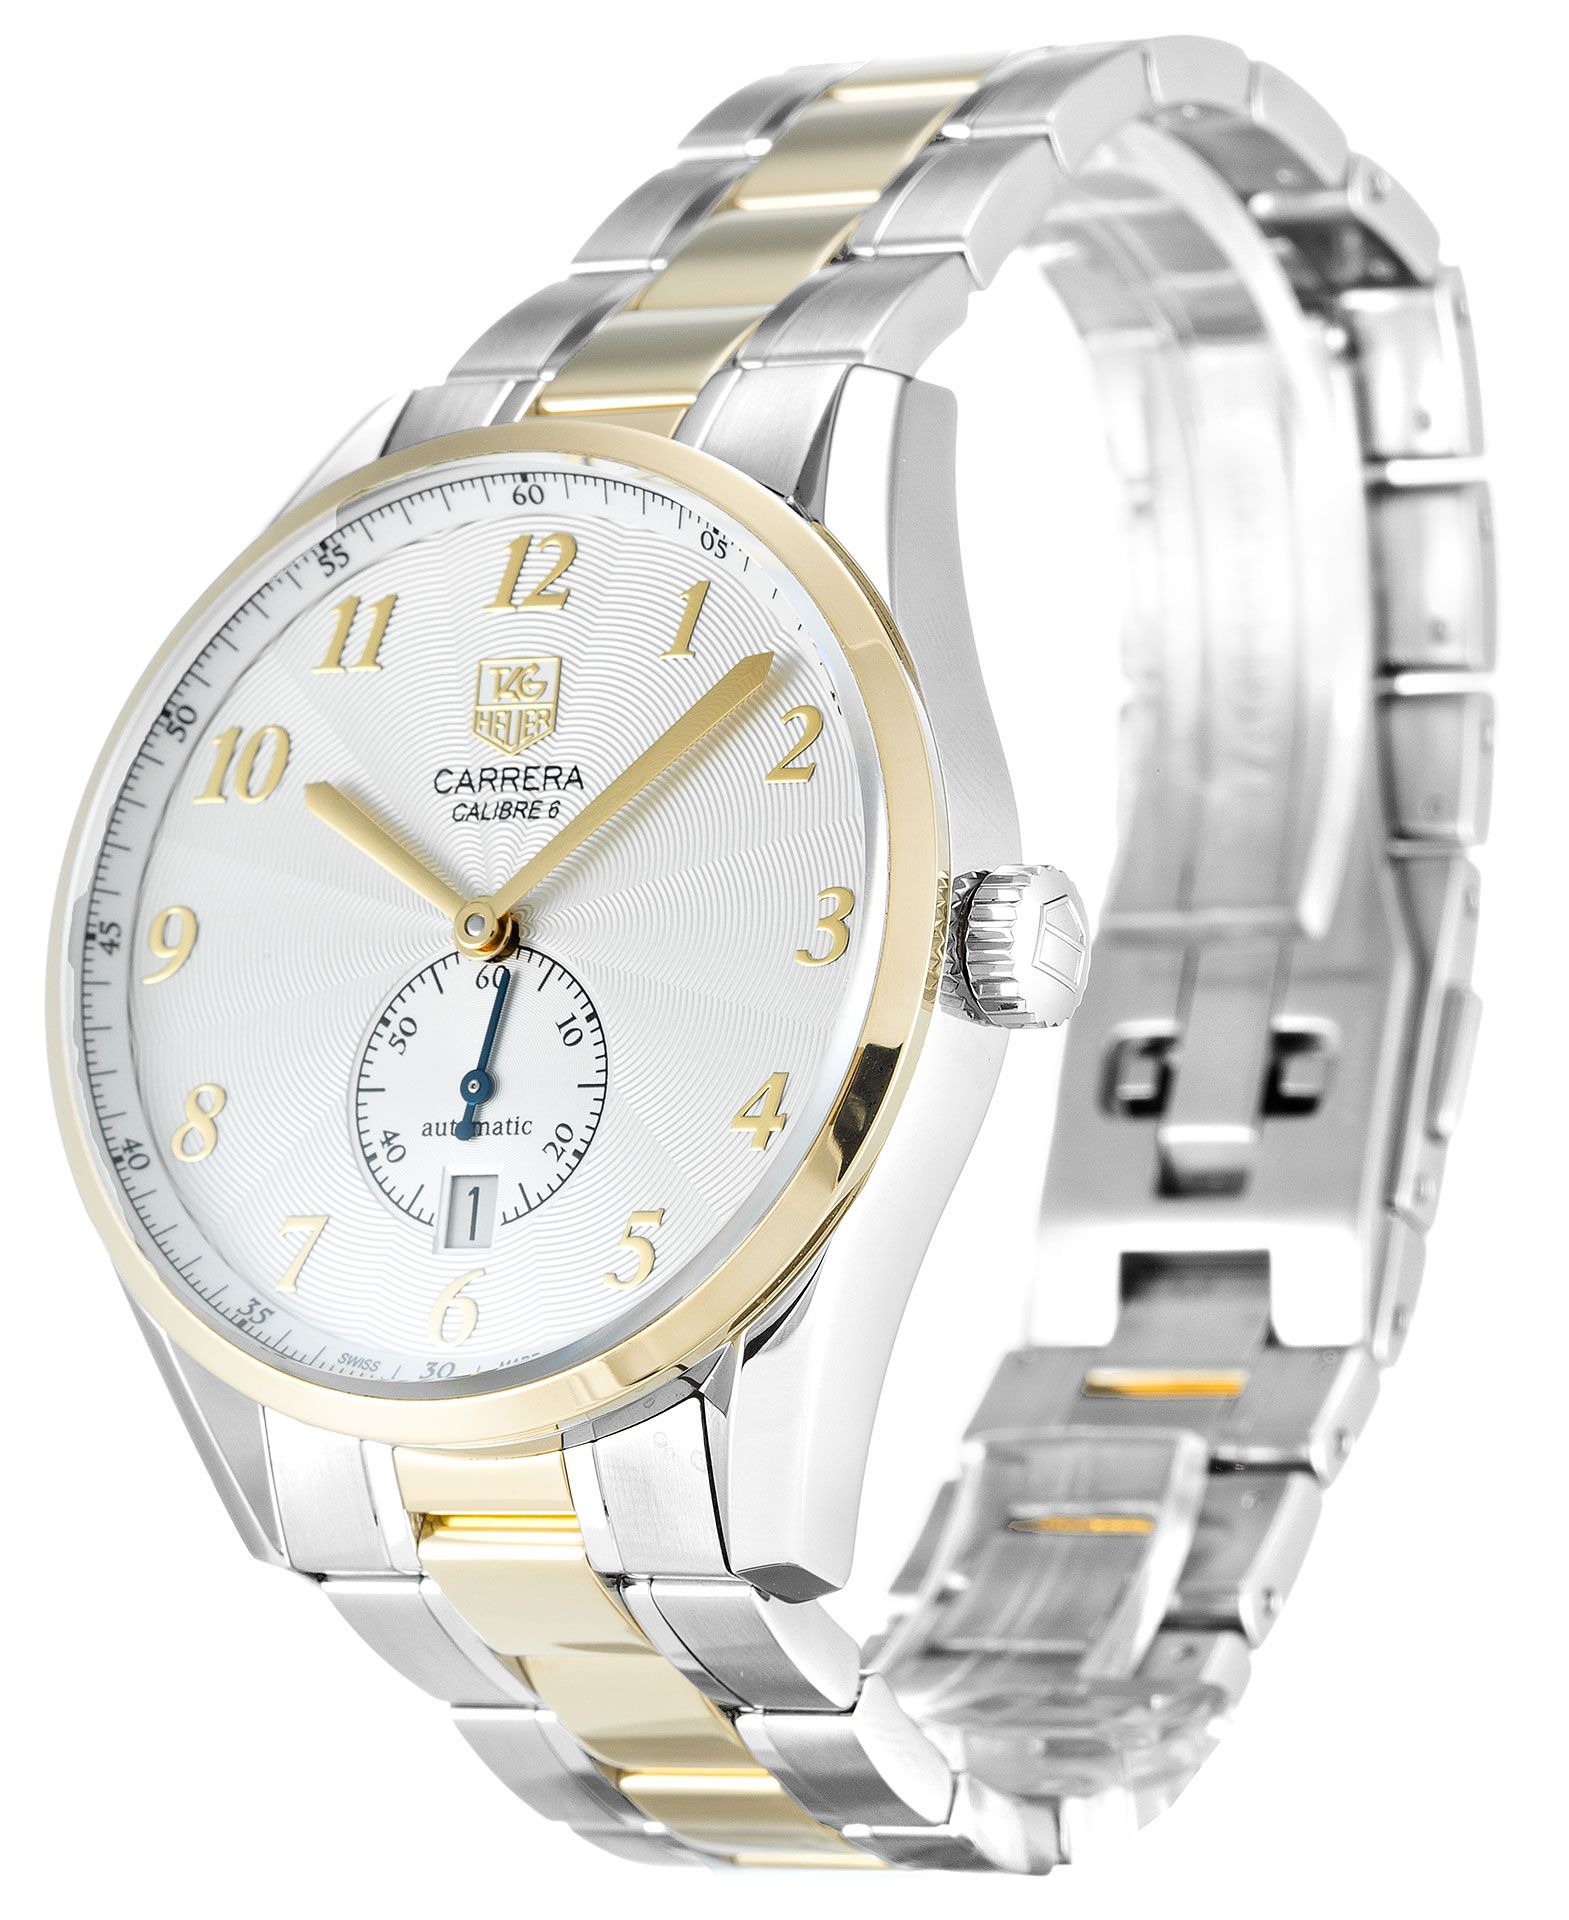 The durable fake TAG Heuer Carrera WAS2150.BD0733 watches are made from stainless steel and yellow gold.